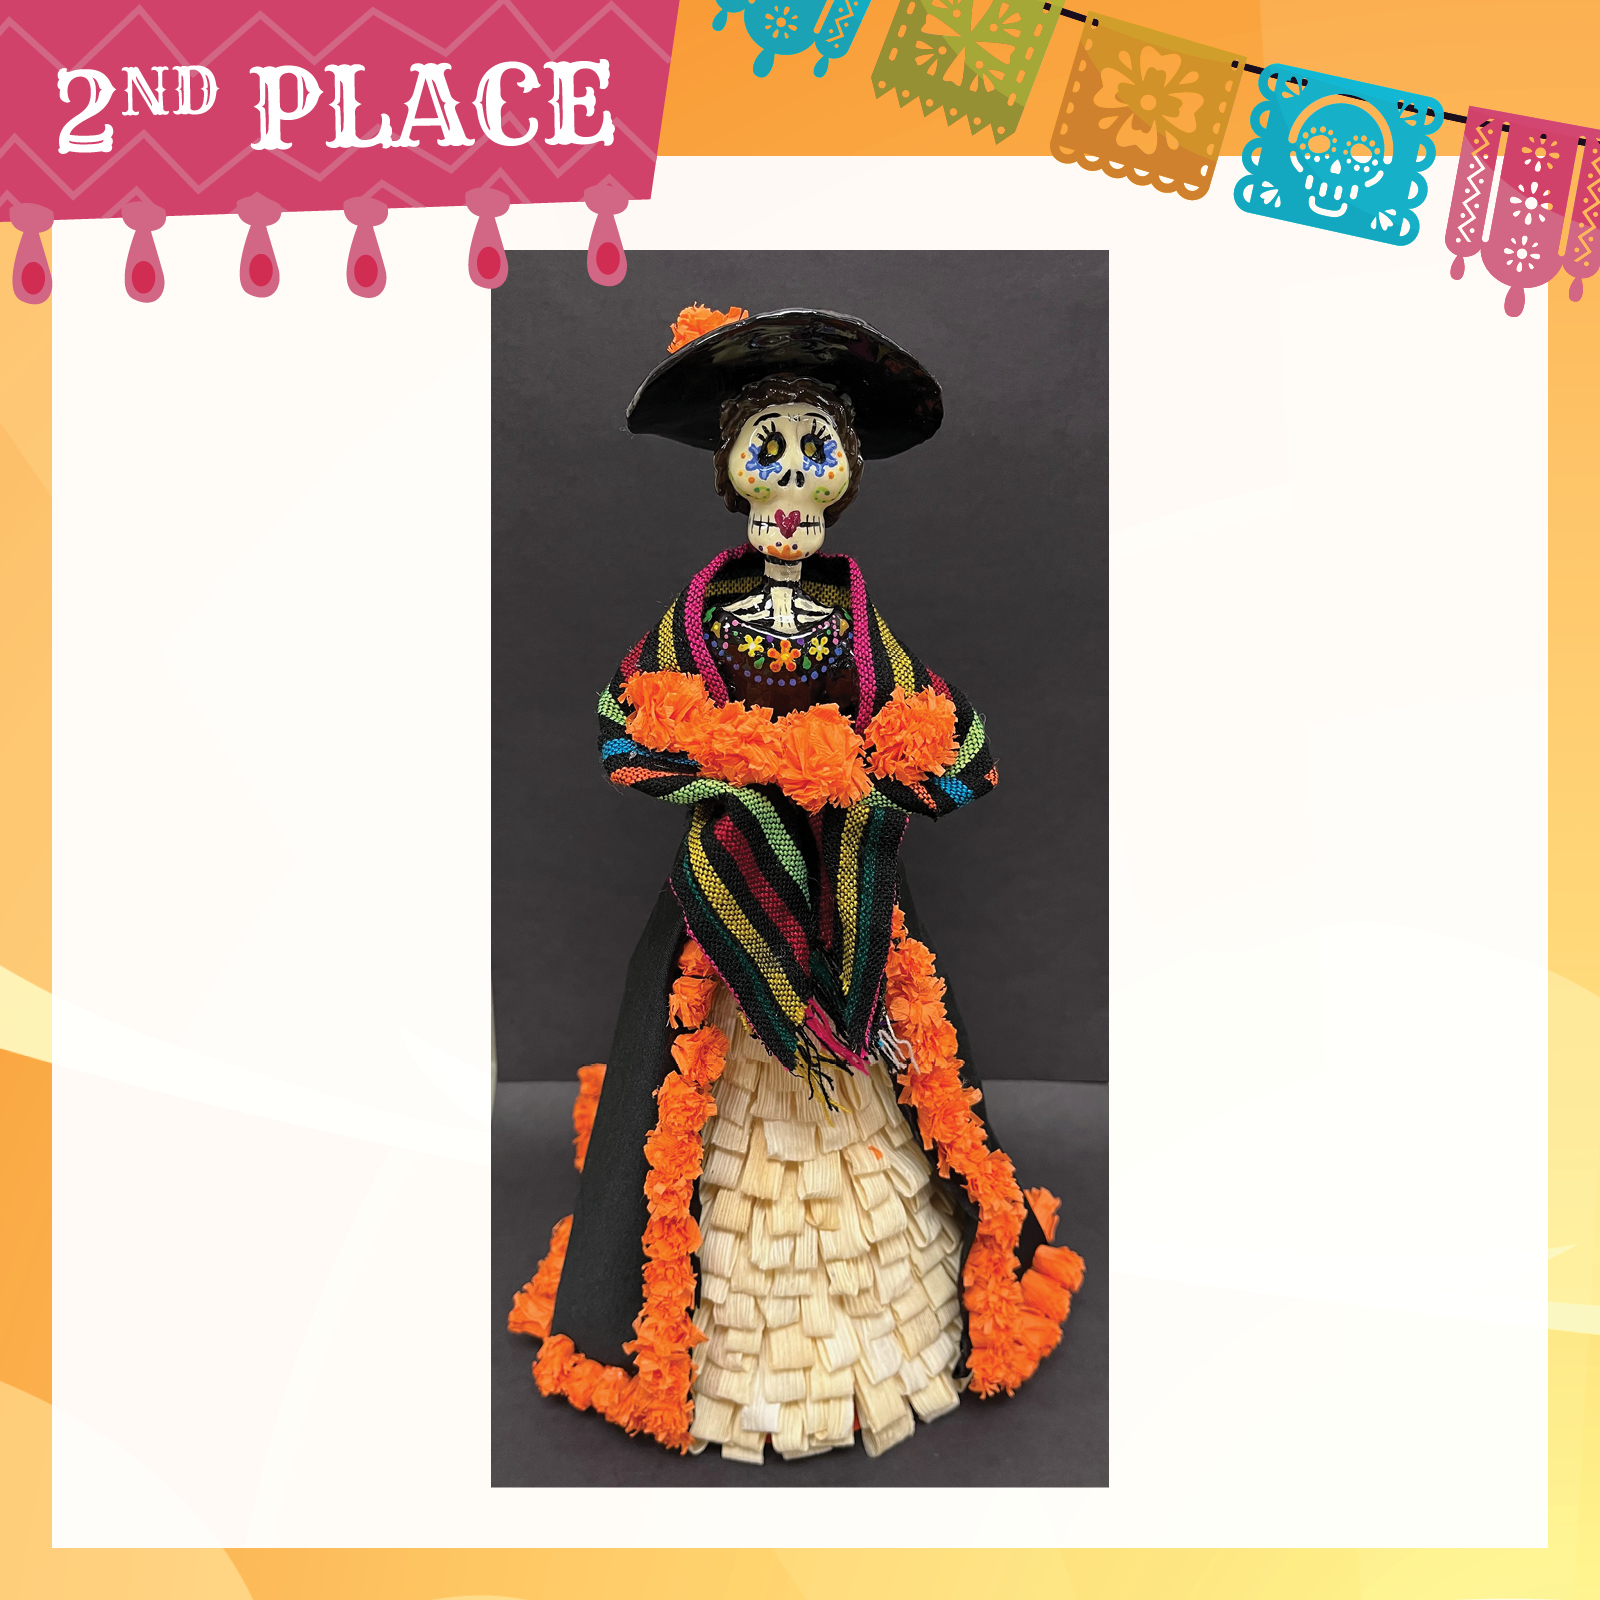 Dia de los muertos sculpture wearing a colorful dress with cornhusk skirt adored with orange flowers